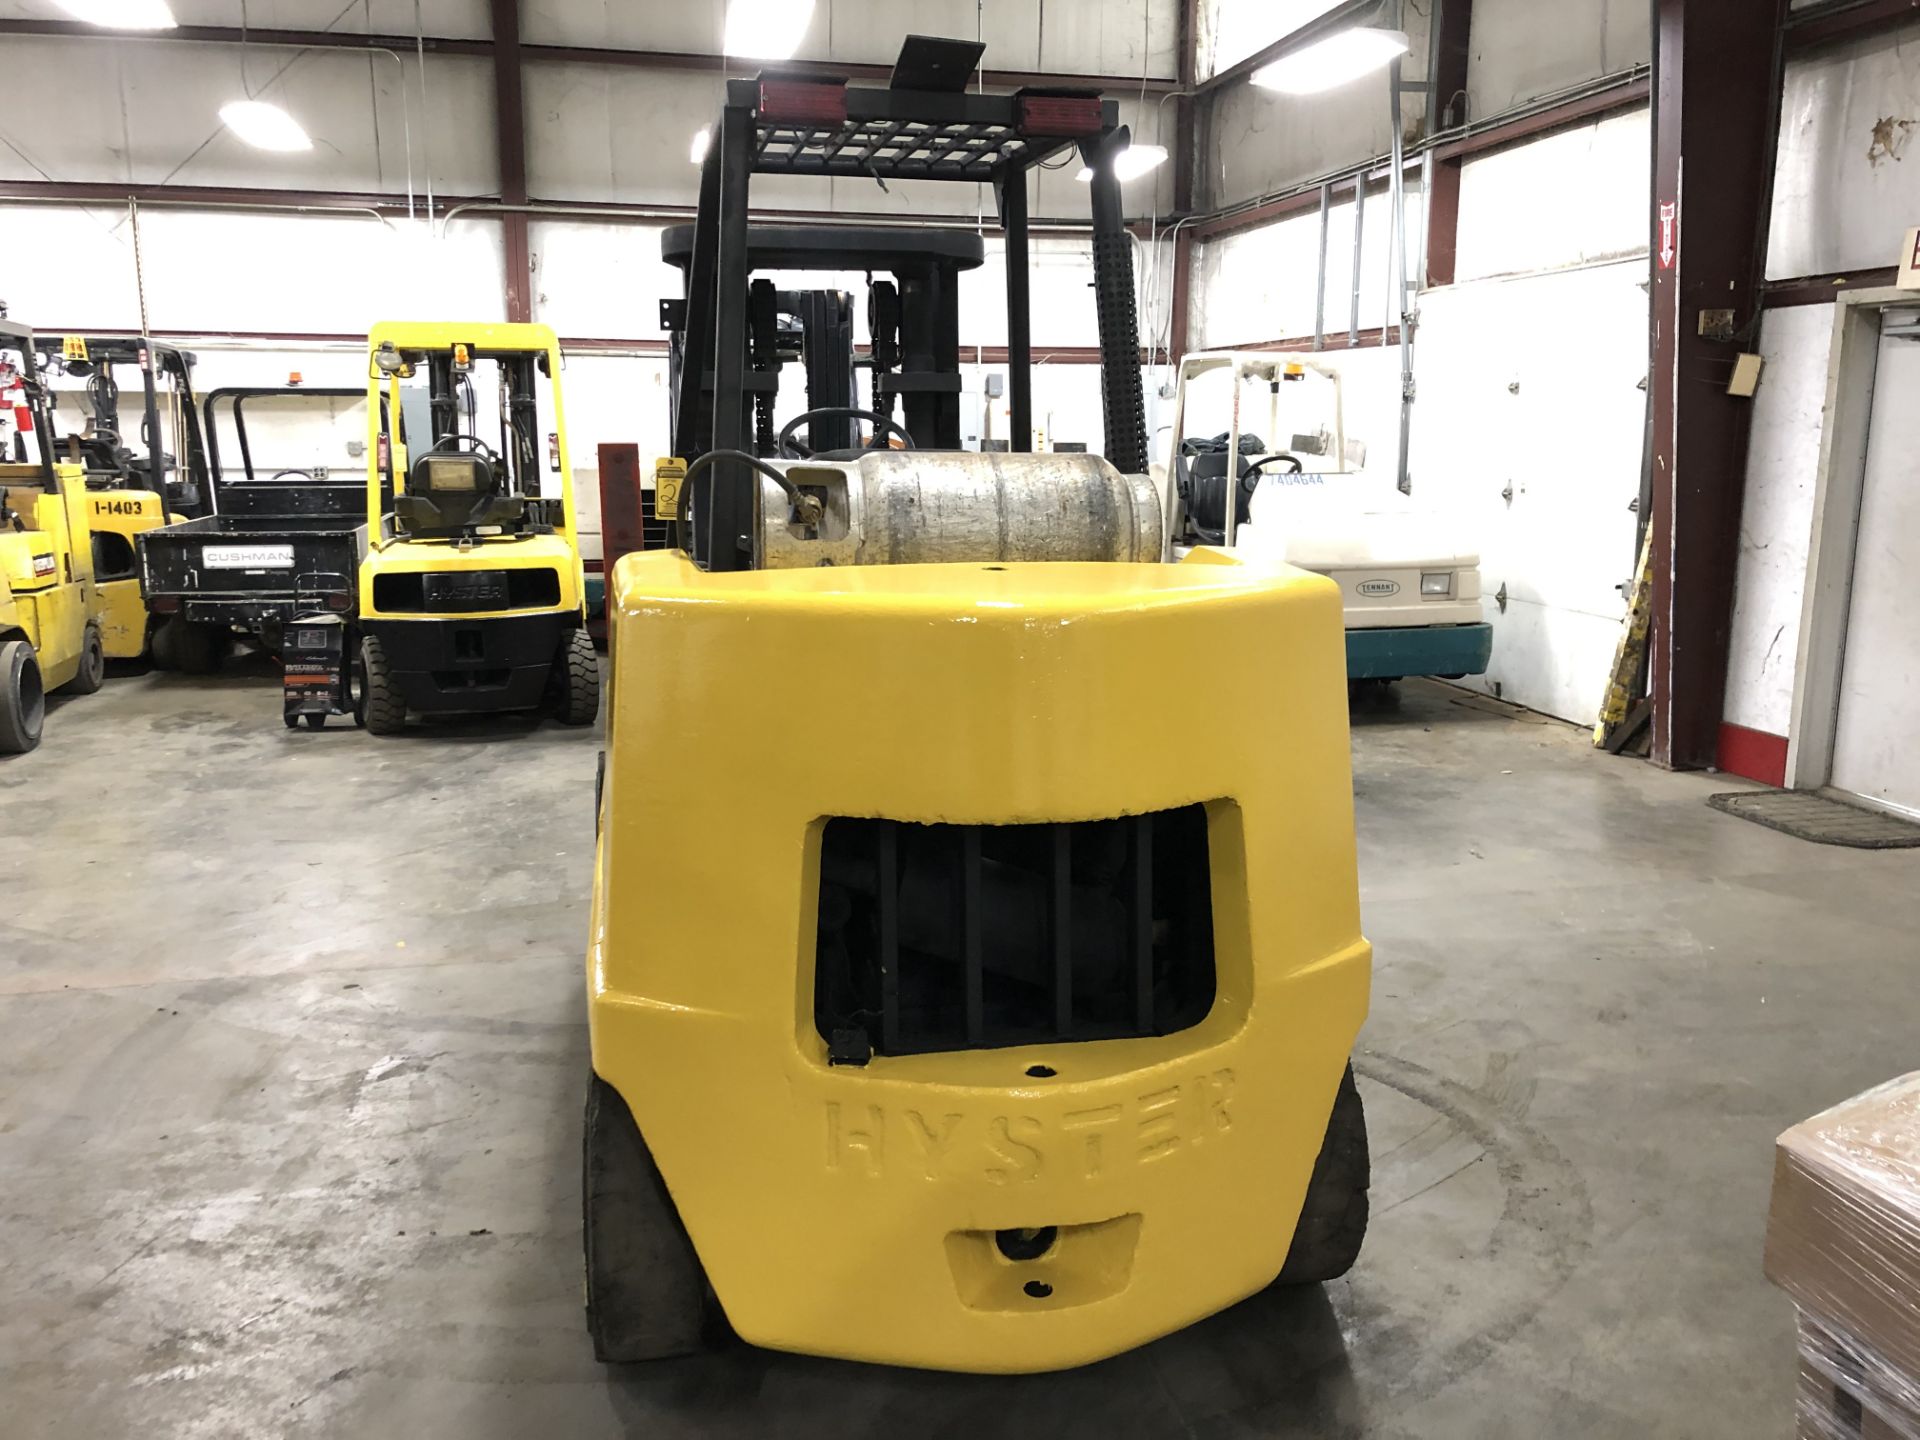 2003 HYSTER 15,500-LB. CAPACITY FORKLIFT, MODEL: S155XL, S/N: B024V02271A, LPG, SOLID TIRES, 2-SPEED - Image 4 of 5